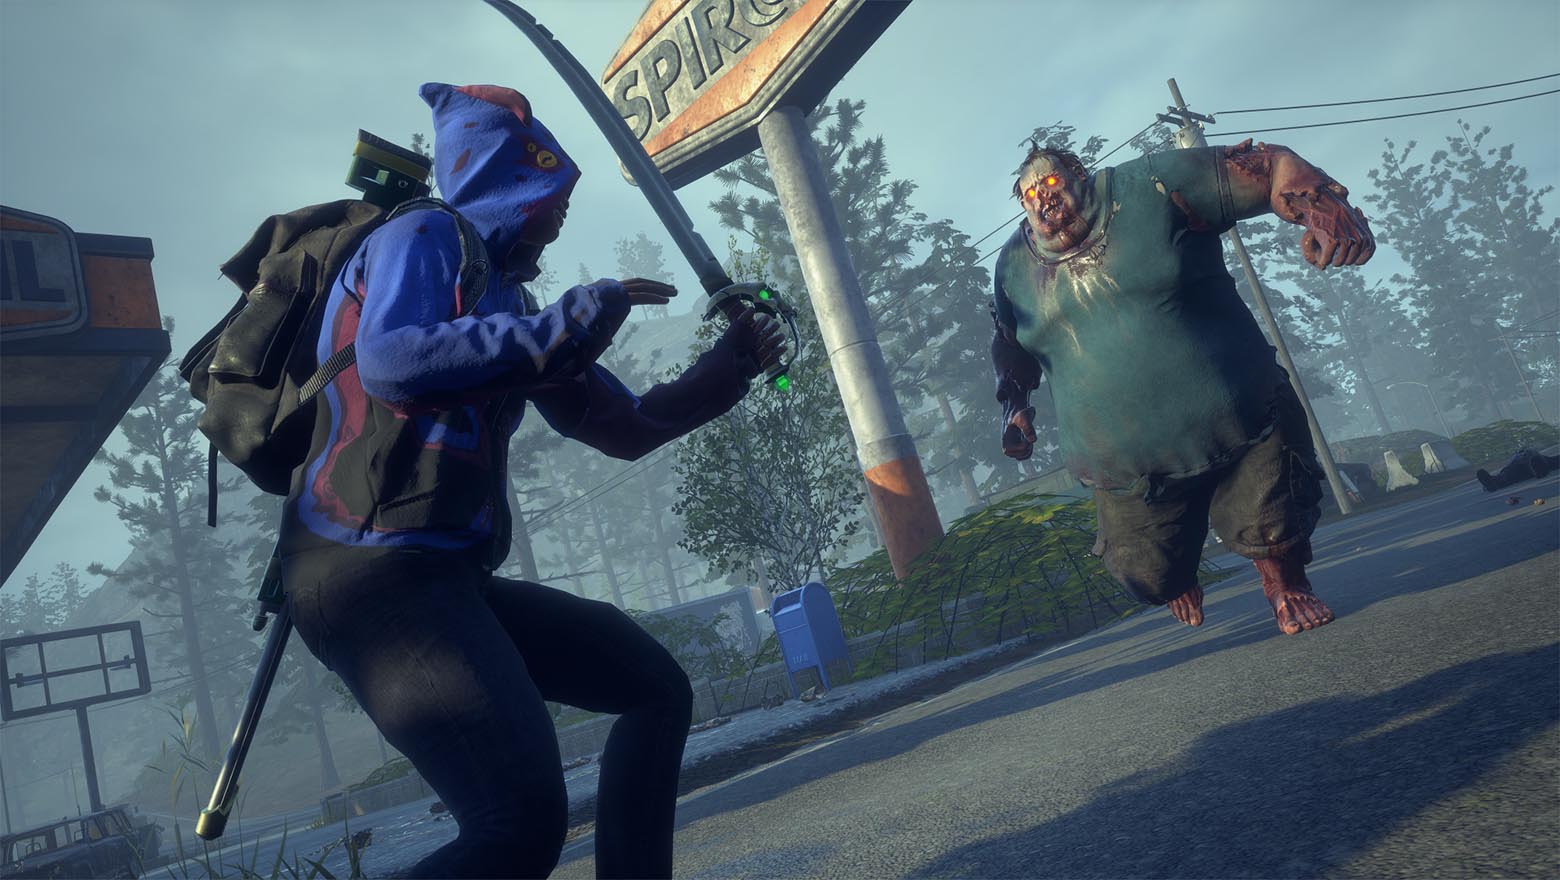 Hooded player wielding a sword against a zombie